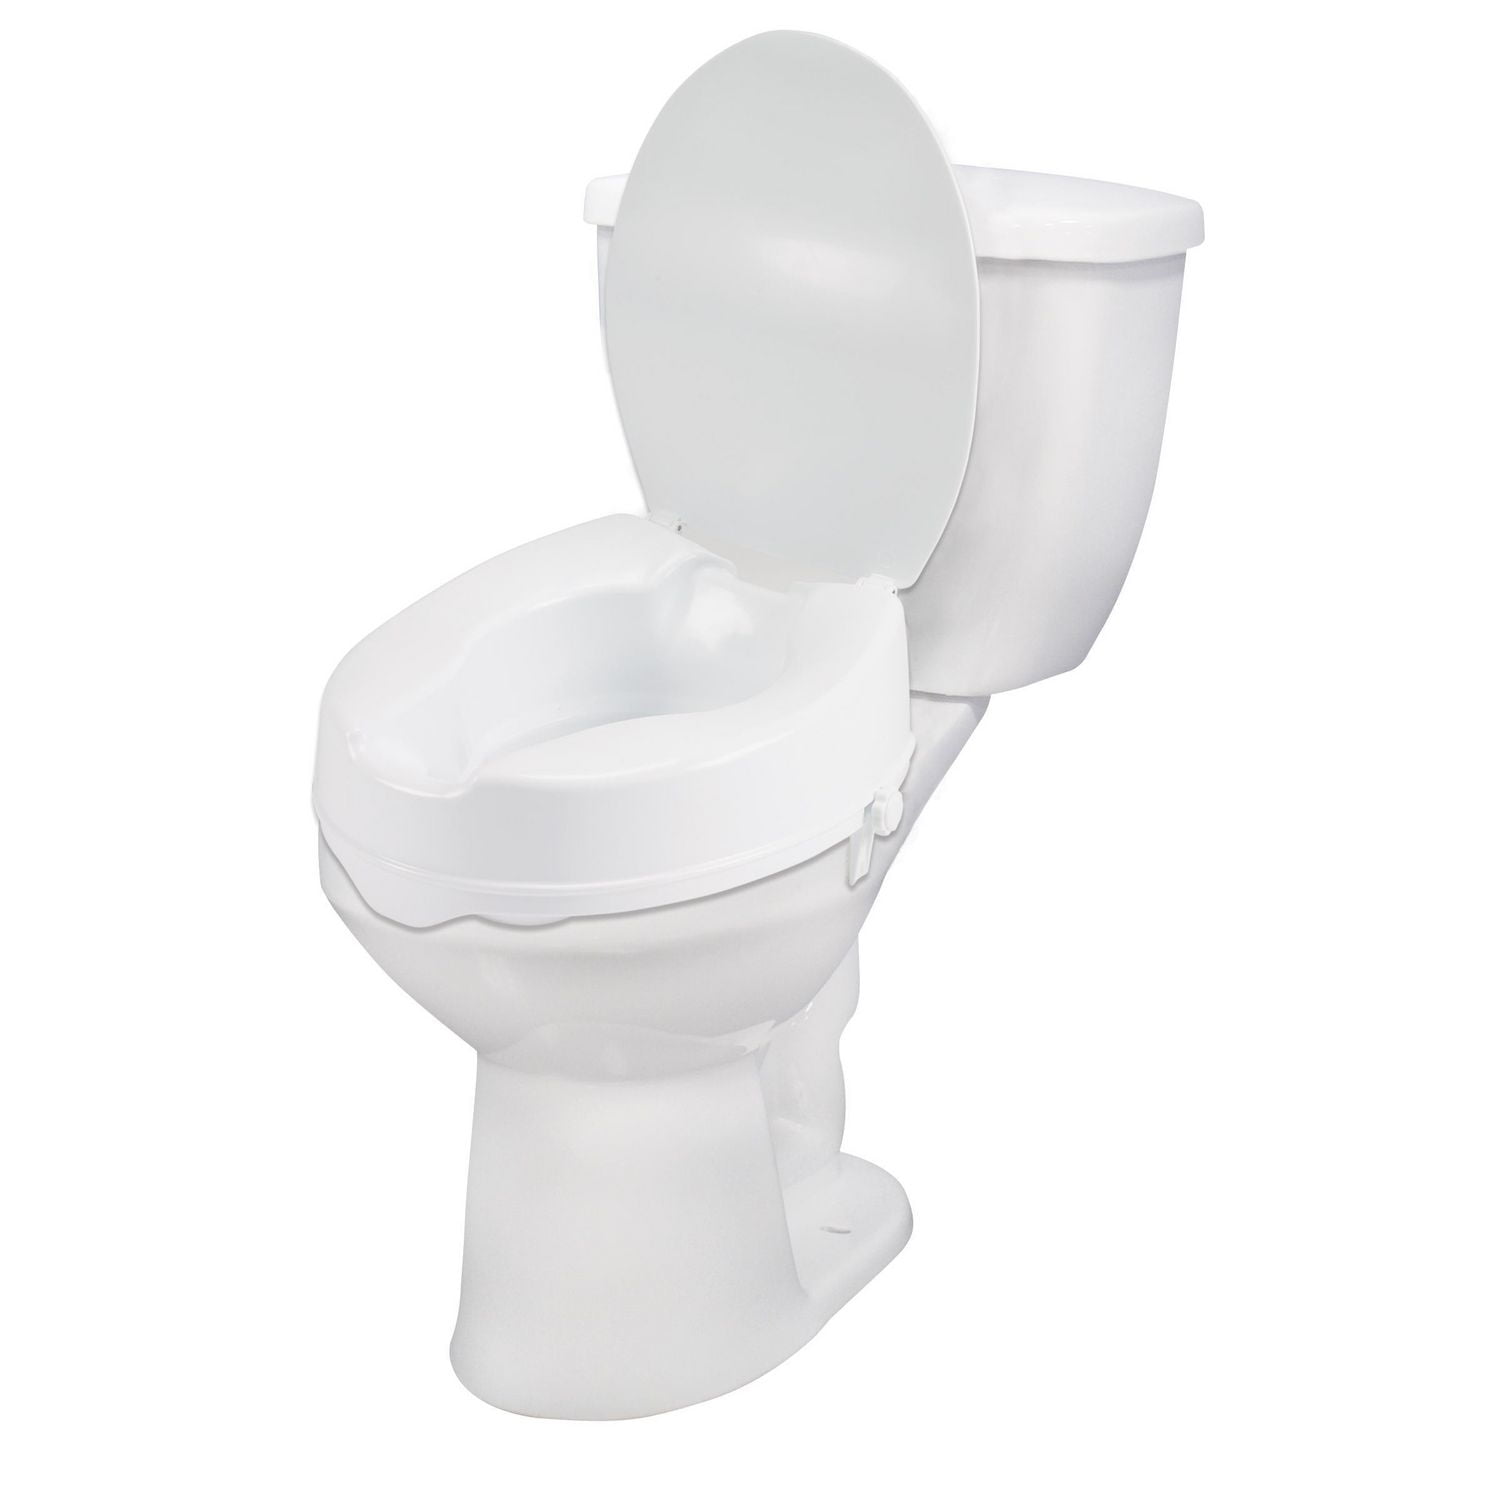 Musical Potty China Trade,Buy China Direct From Musical Potty Factories at